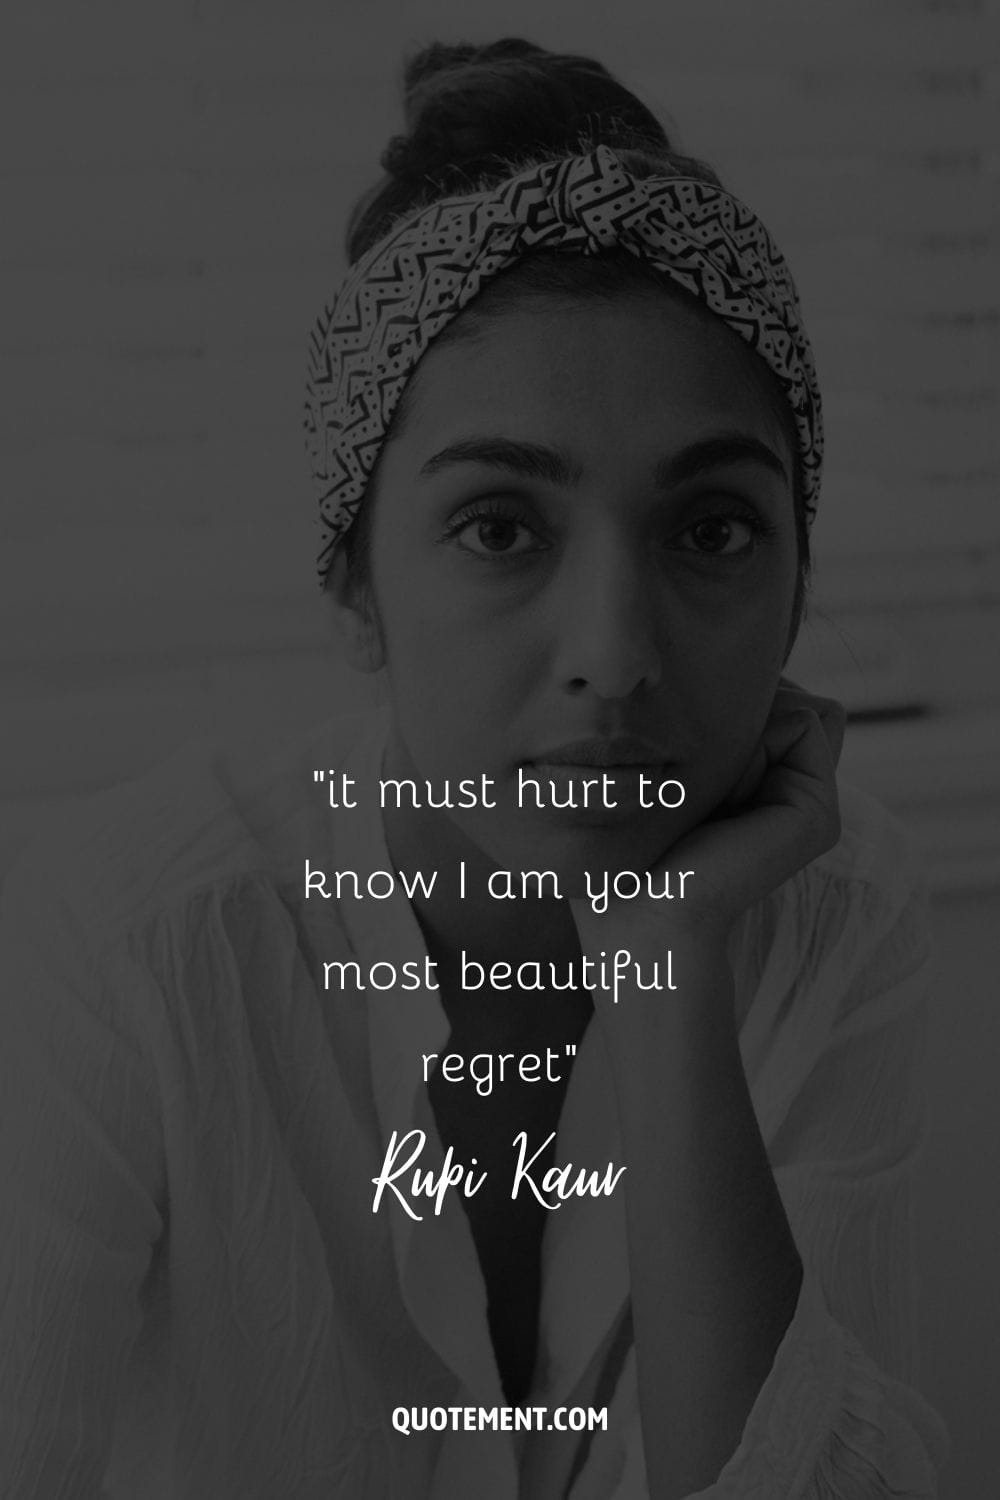 it must hurt to know I am your most beautiful regret”